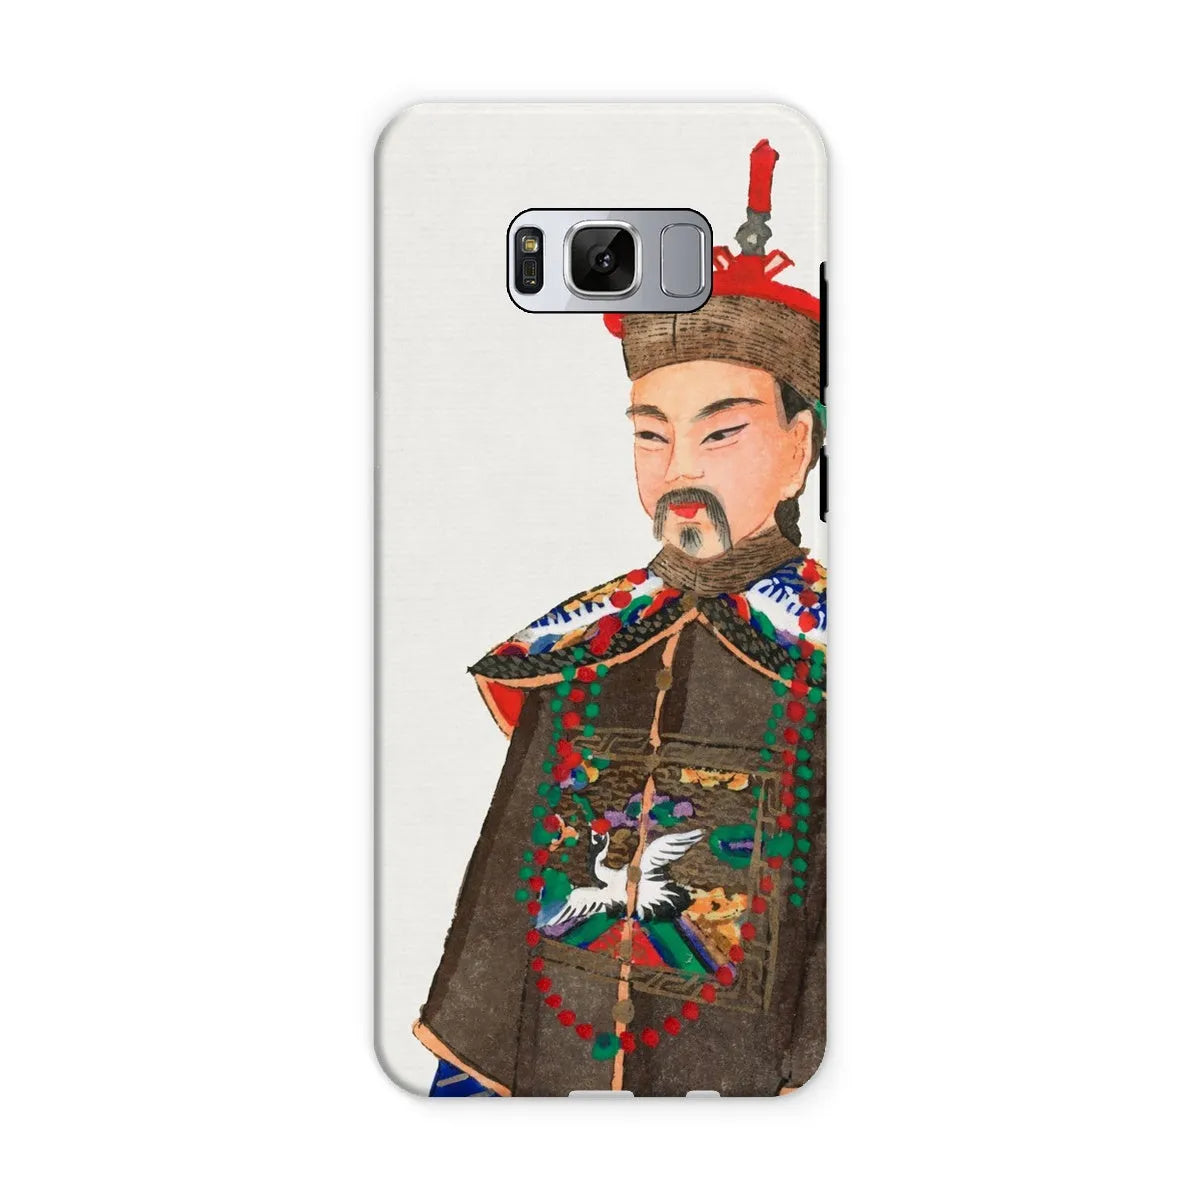 Nobleman At Court - Chinese Aesthetic Manchu Art Phone Case - Samsung Galaxy S8 / Matte - Mobile Phone Cases